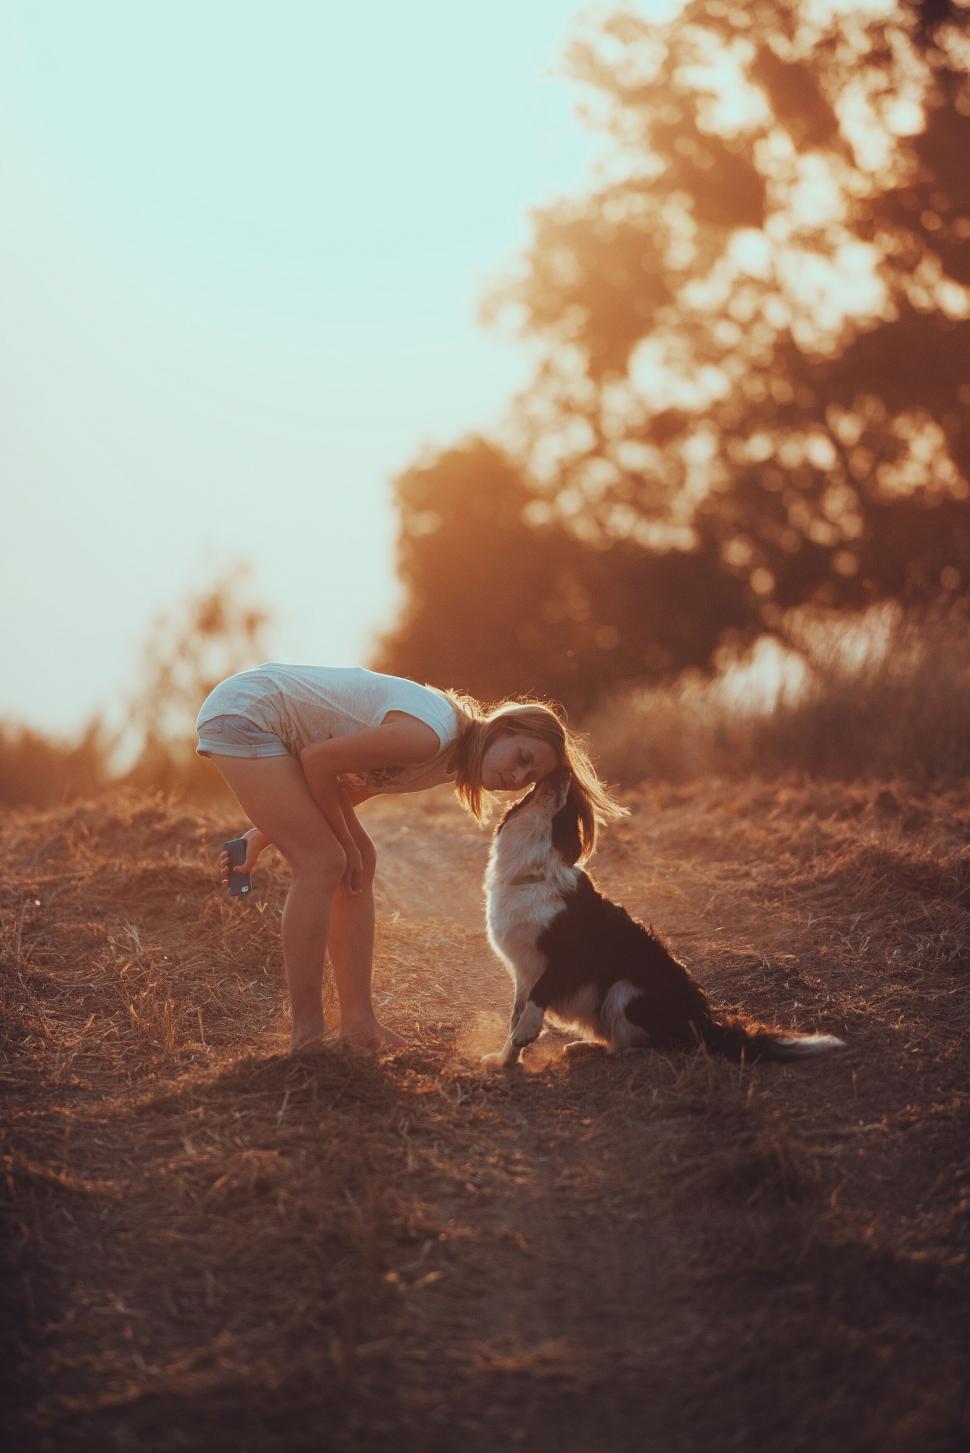 Free Image of Girl playing with dog in sunset field 